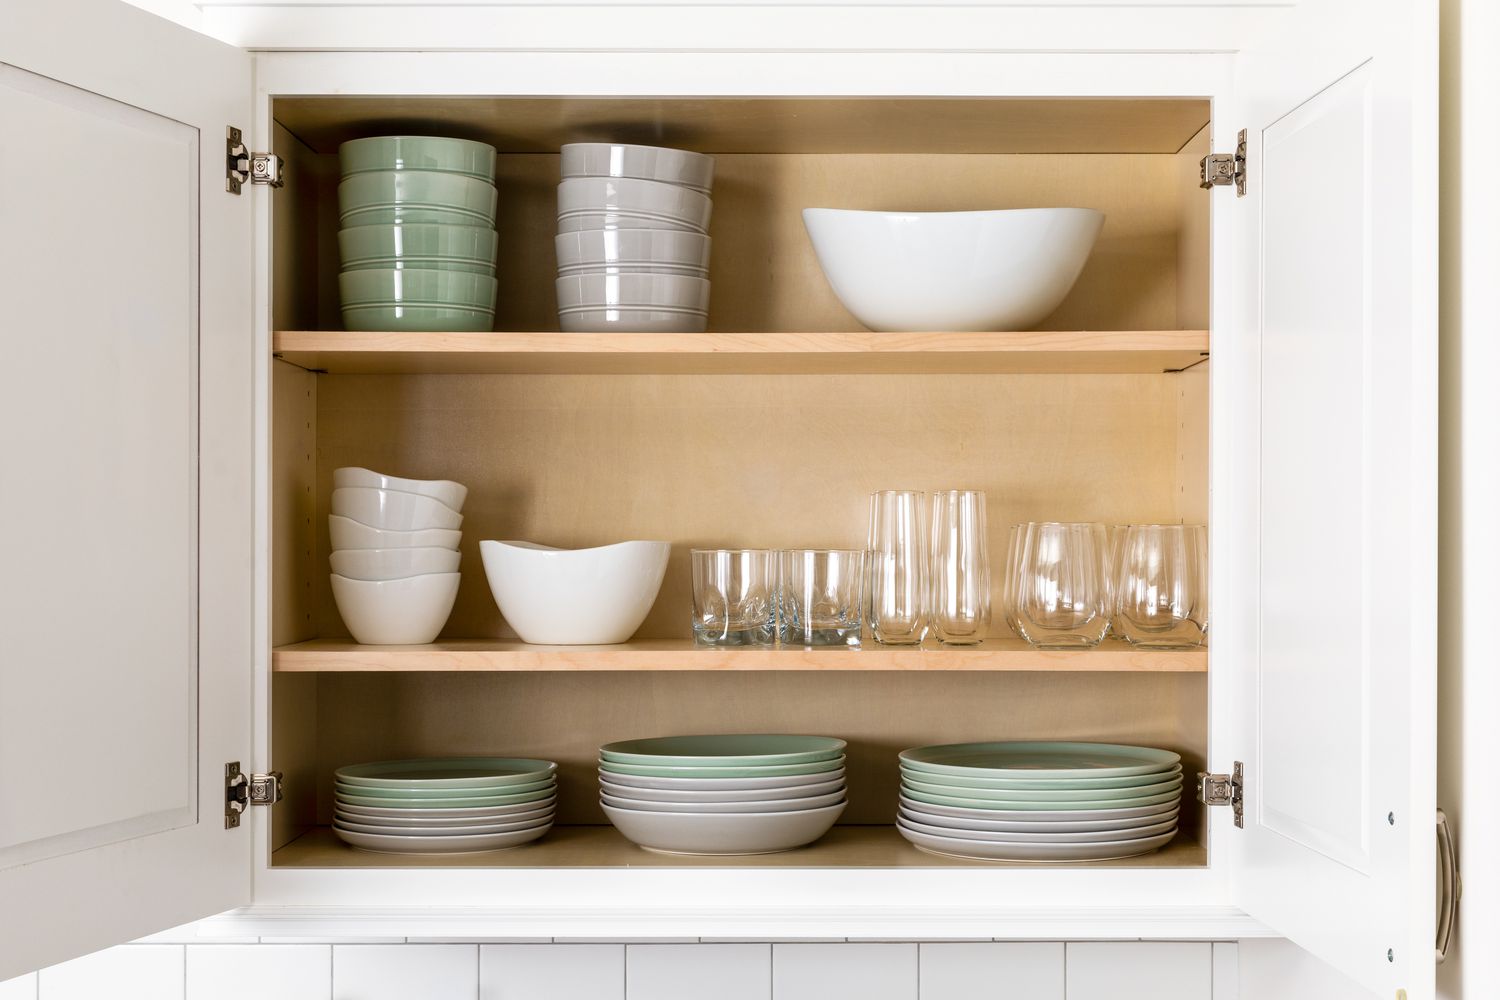 How To Store Dishes In Cabinets